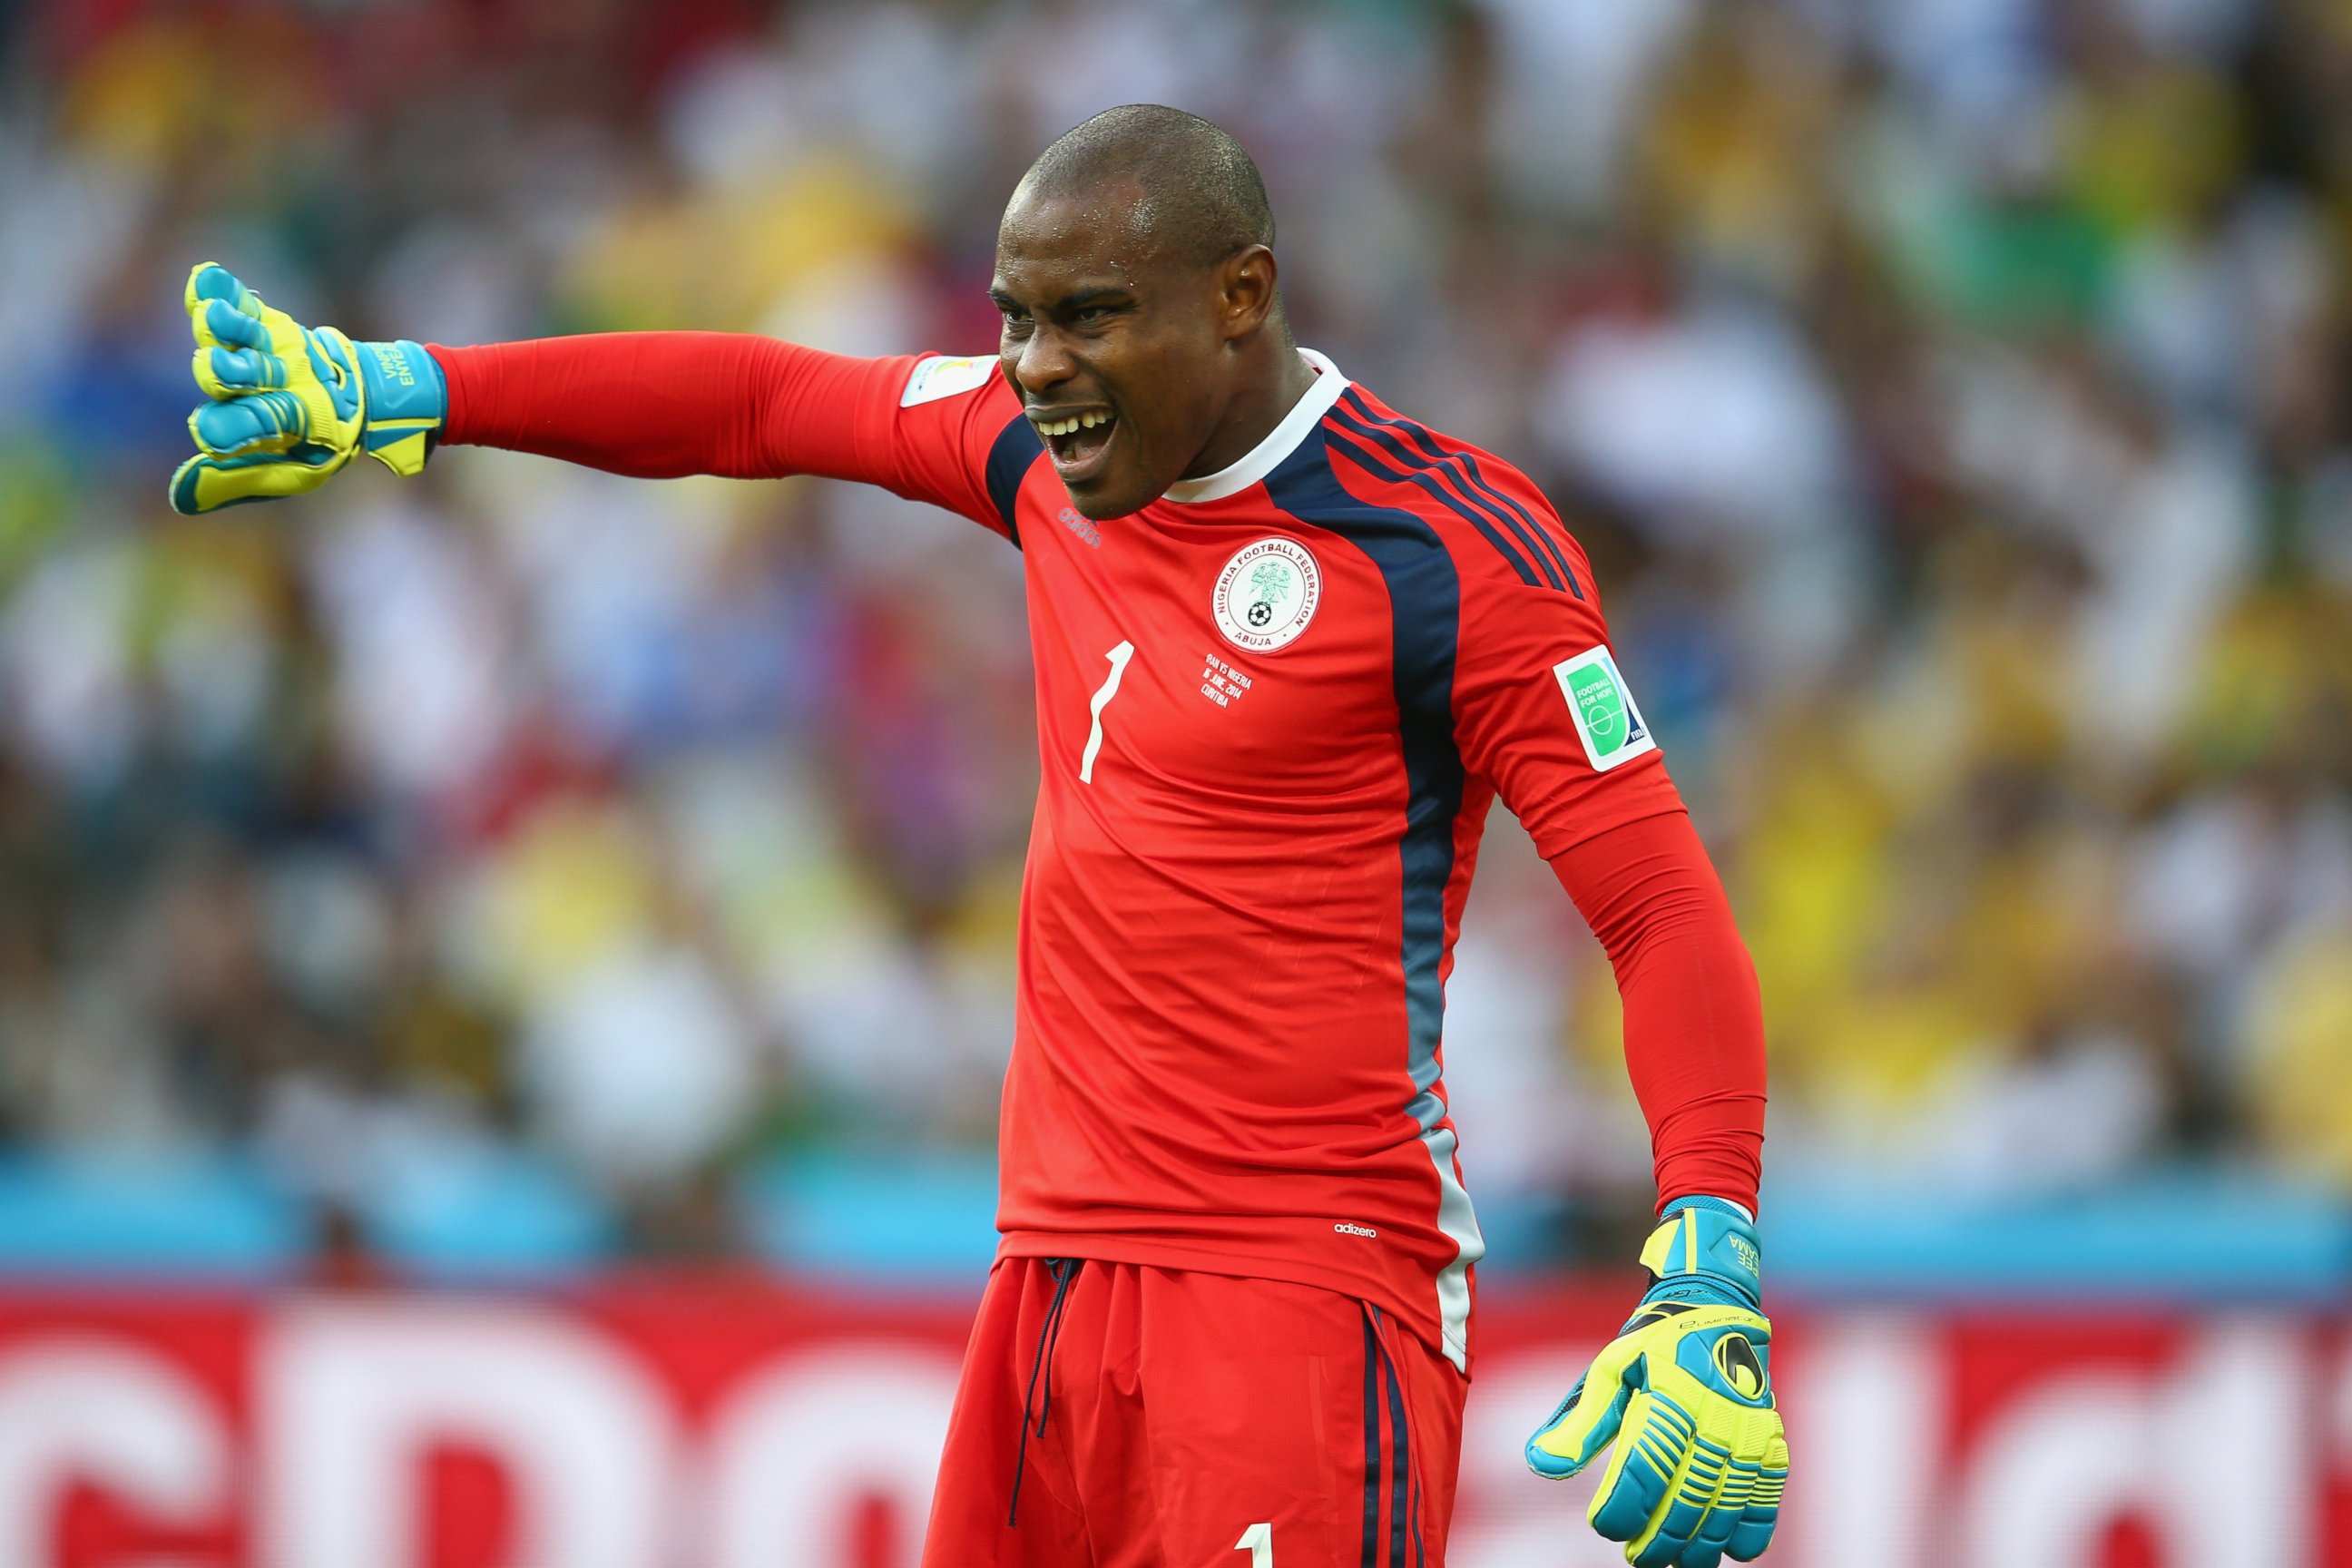 PHOTO: Vincent Enyeama of Nigeria gestures during the 2014 FIFA World Cup Brazil Group F match between Iran and Nigeria at Arena da Baixada on June 16, 2014 in Curitiba, Brazil. 